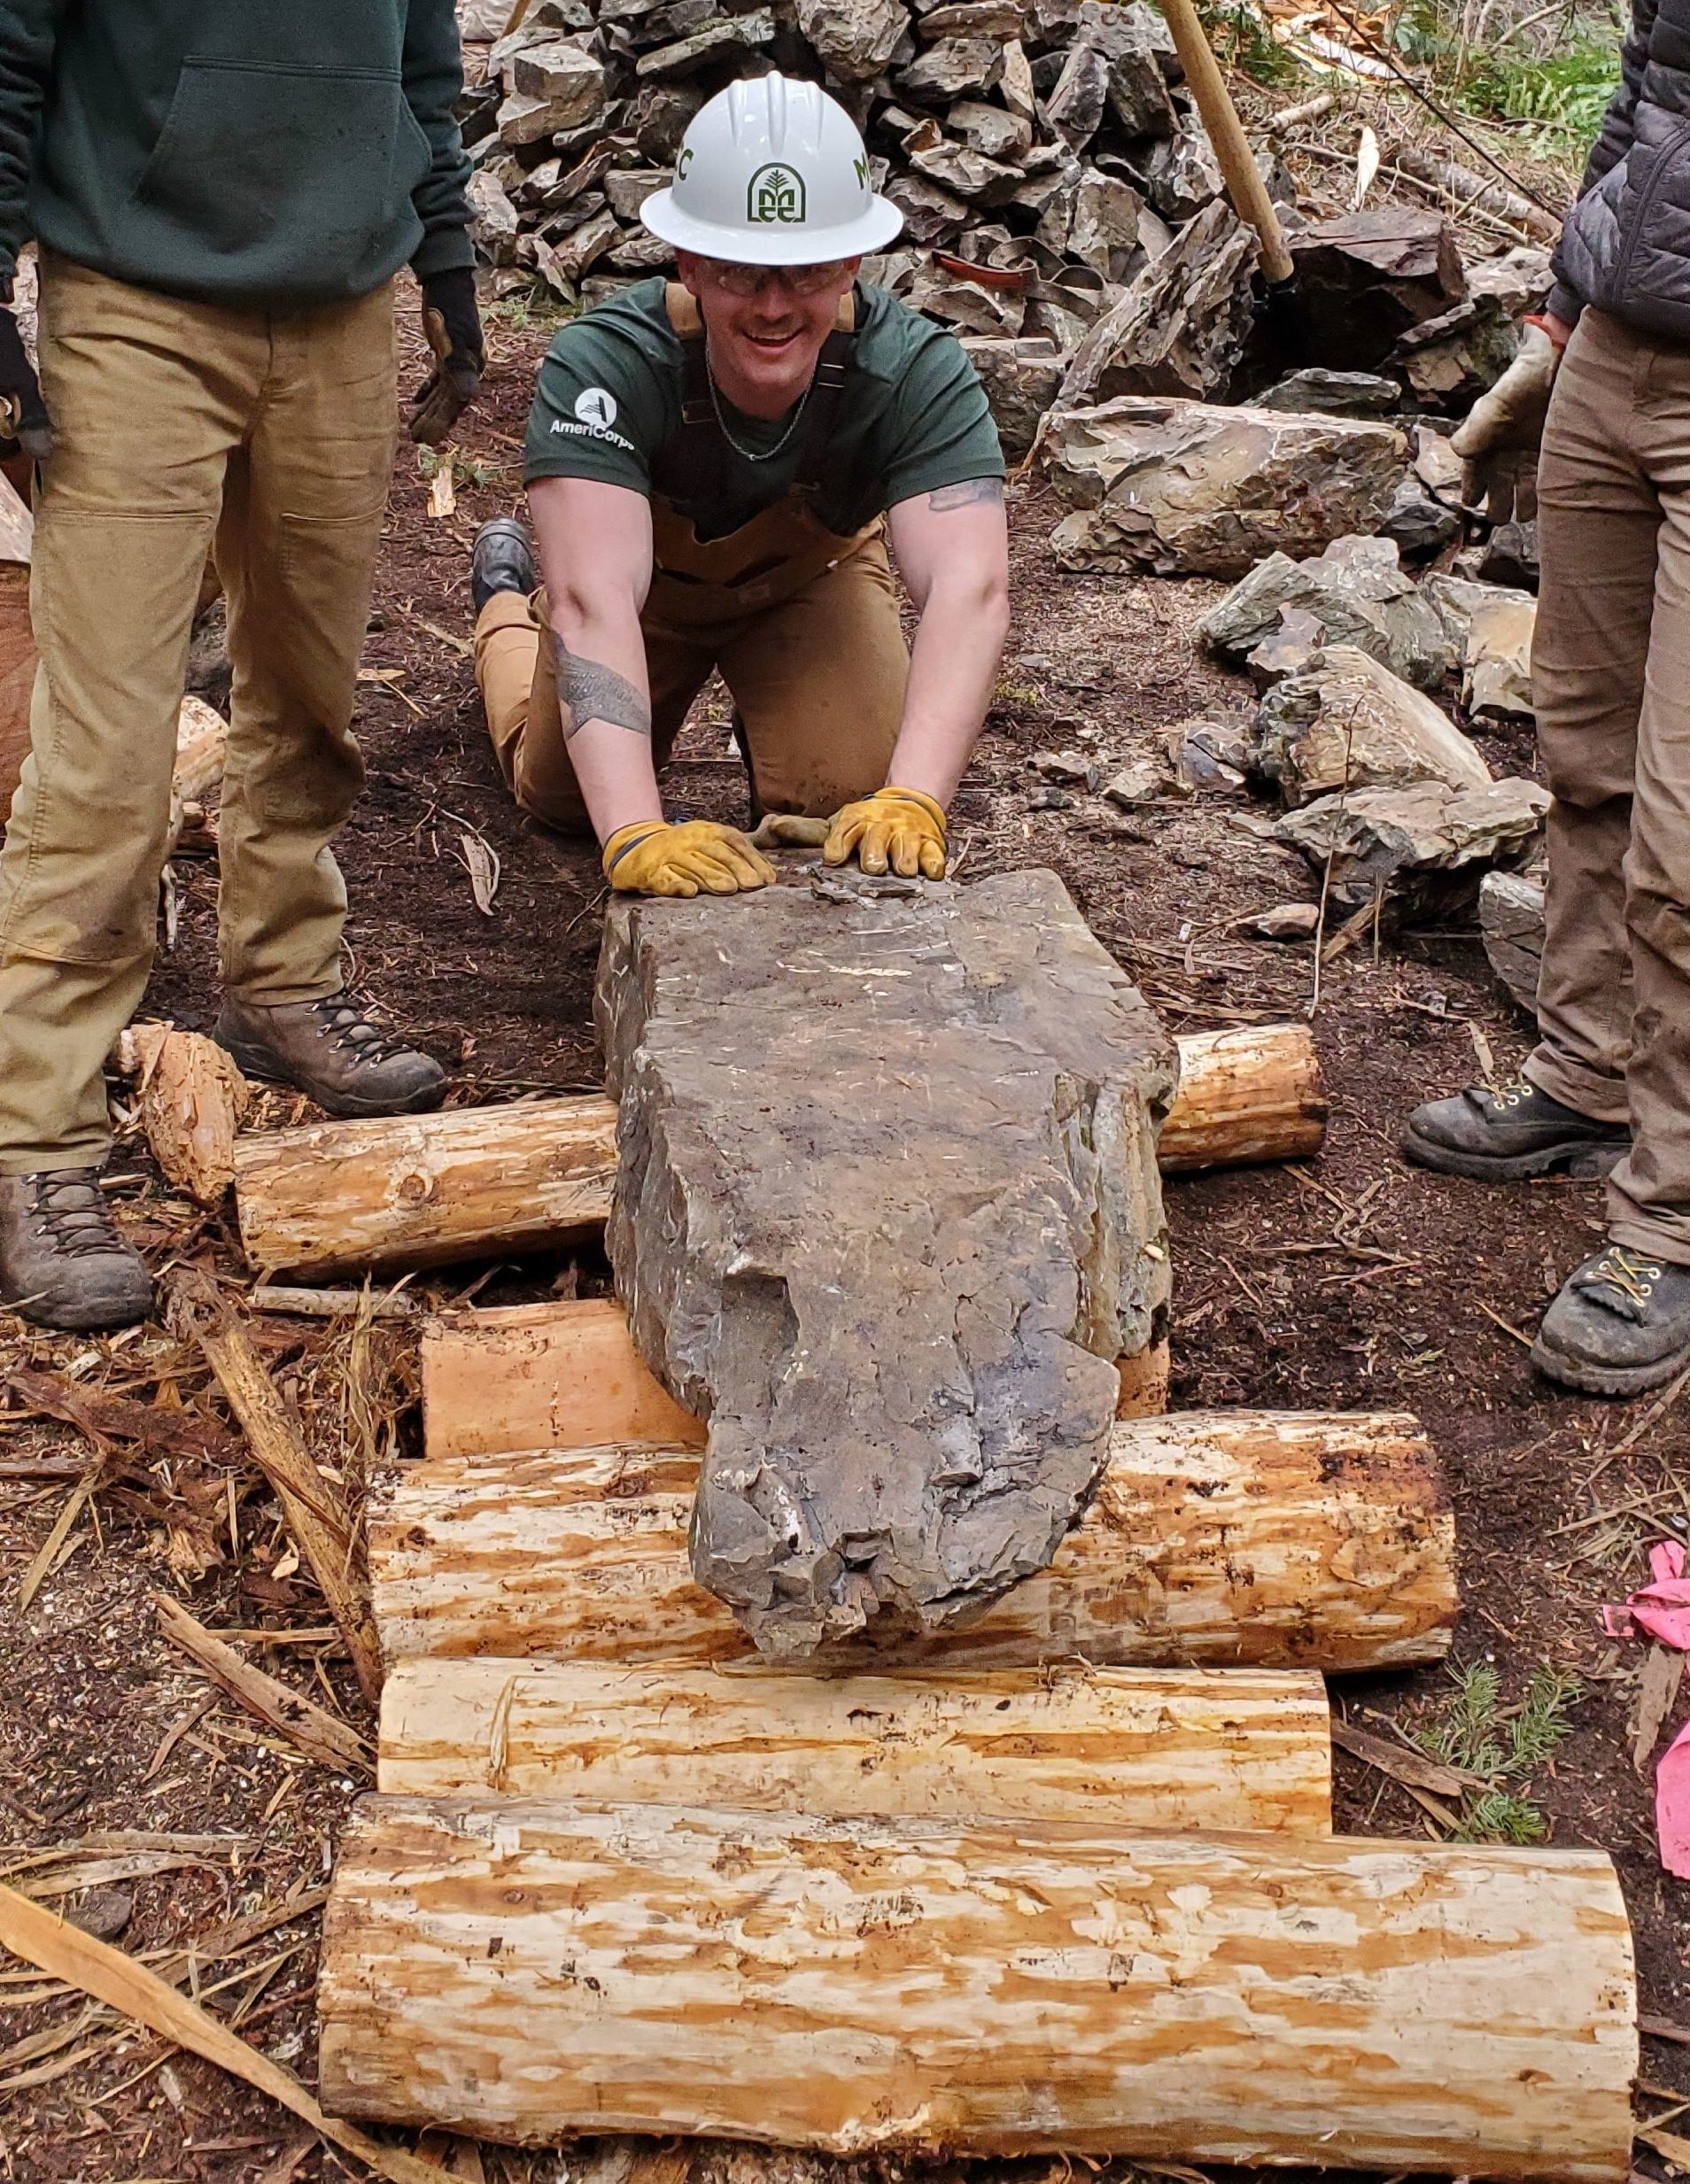 A crew leader wearing a helmet, gloves, and glasses rolls a large flat rock over several logs to transport it down trail.